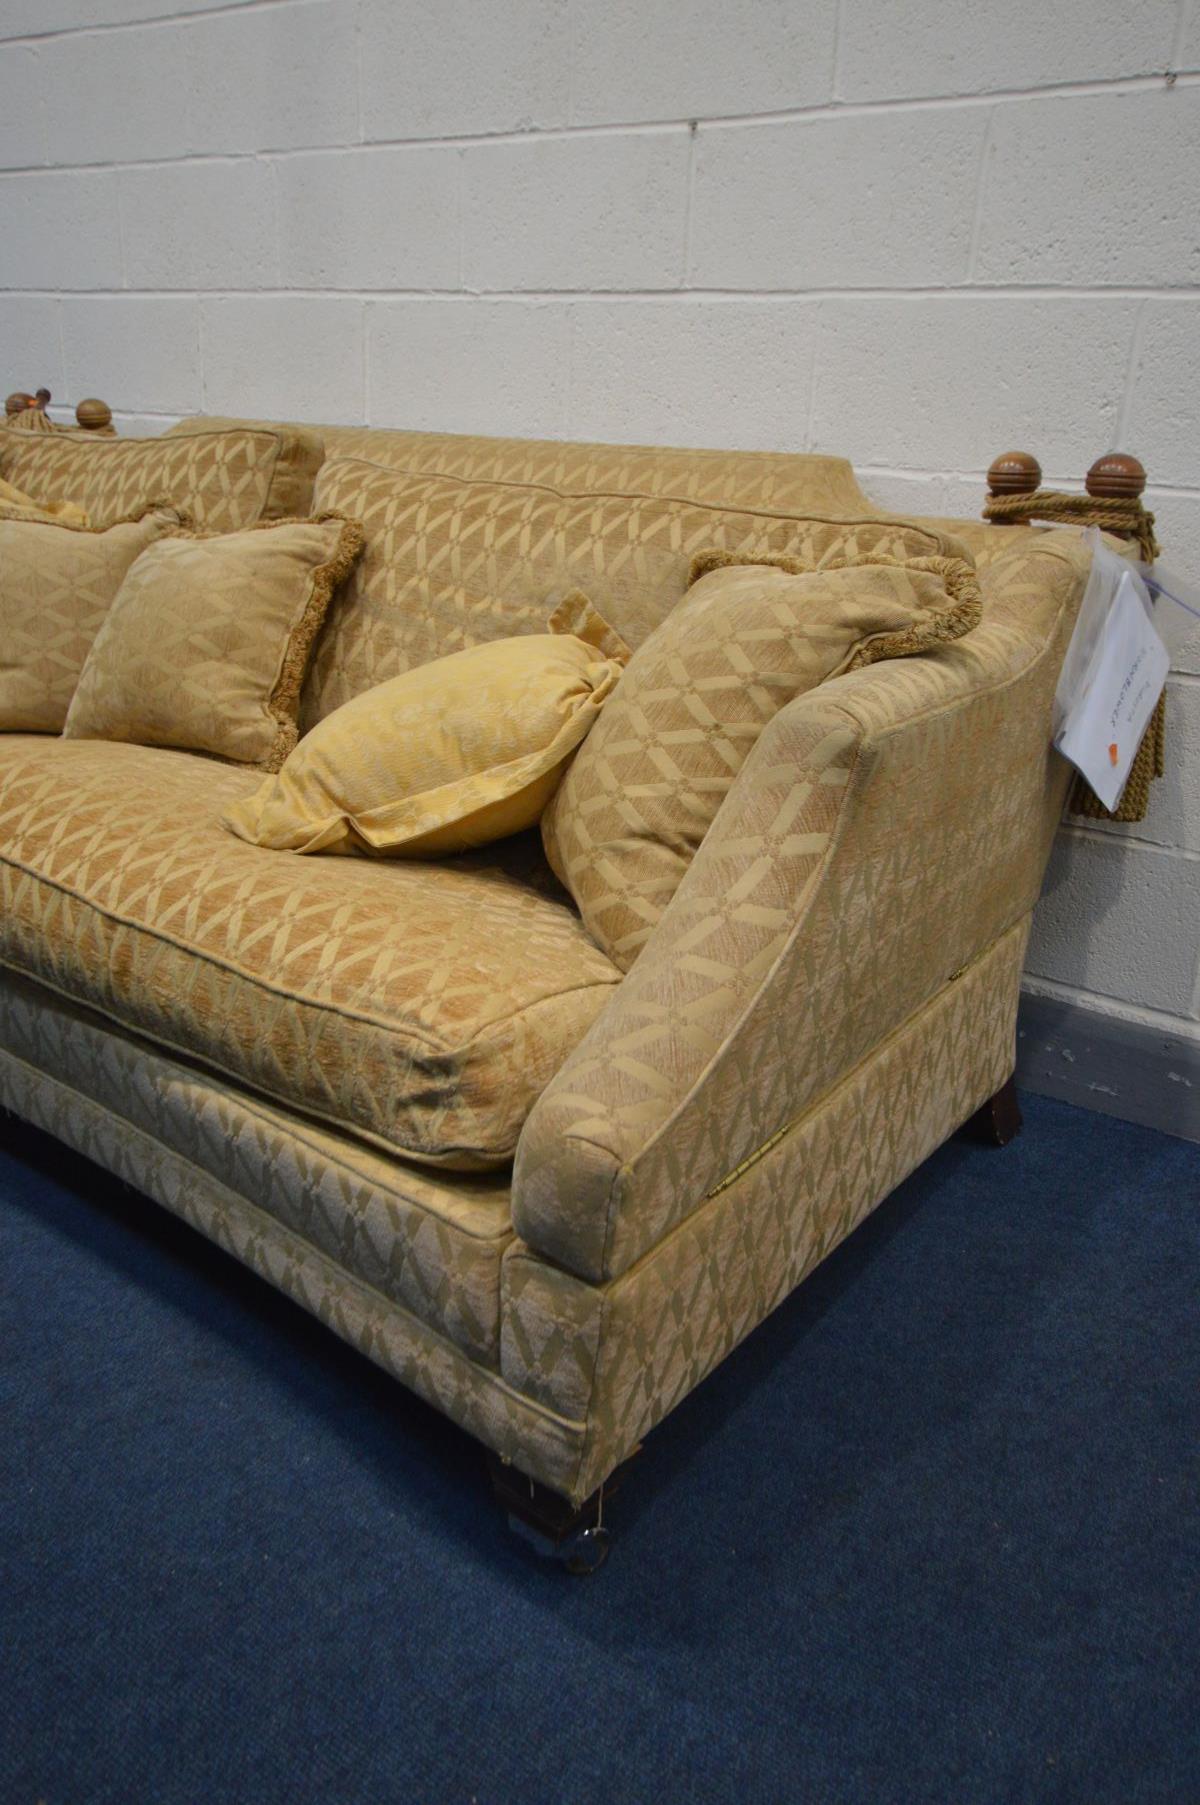 A WALNUT AND GOLD UPHOLSTERED DURESTA HORNBLOWER KNOWLE SOFA, with drop ends to each end, on - Image 4 of 8